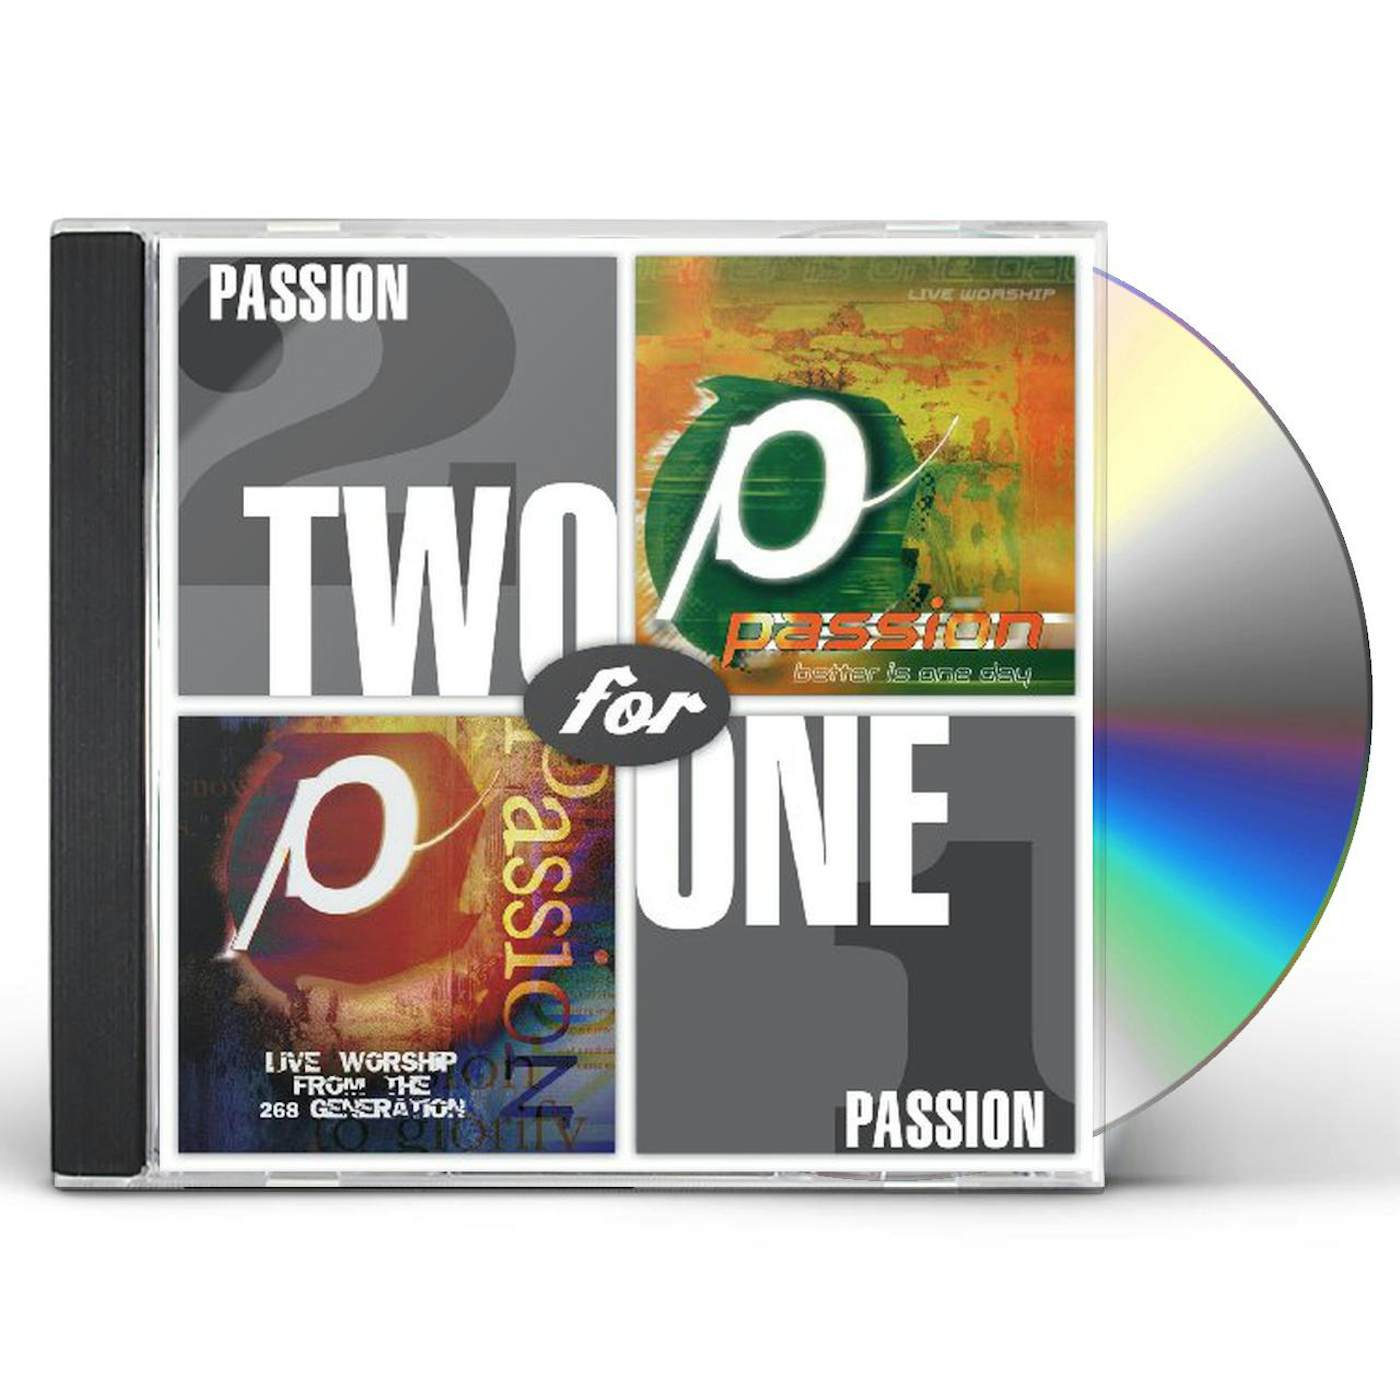 Passion Band TWO FOR ONE: PASSION 98 / BETTER IS ONE DAY CD